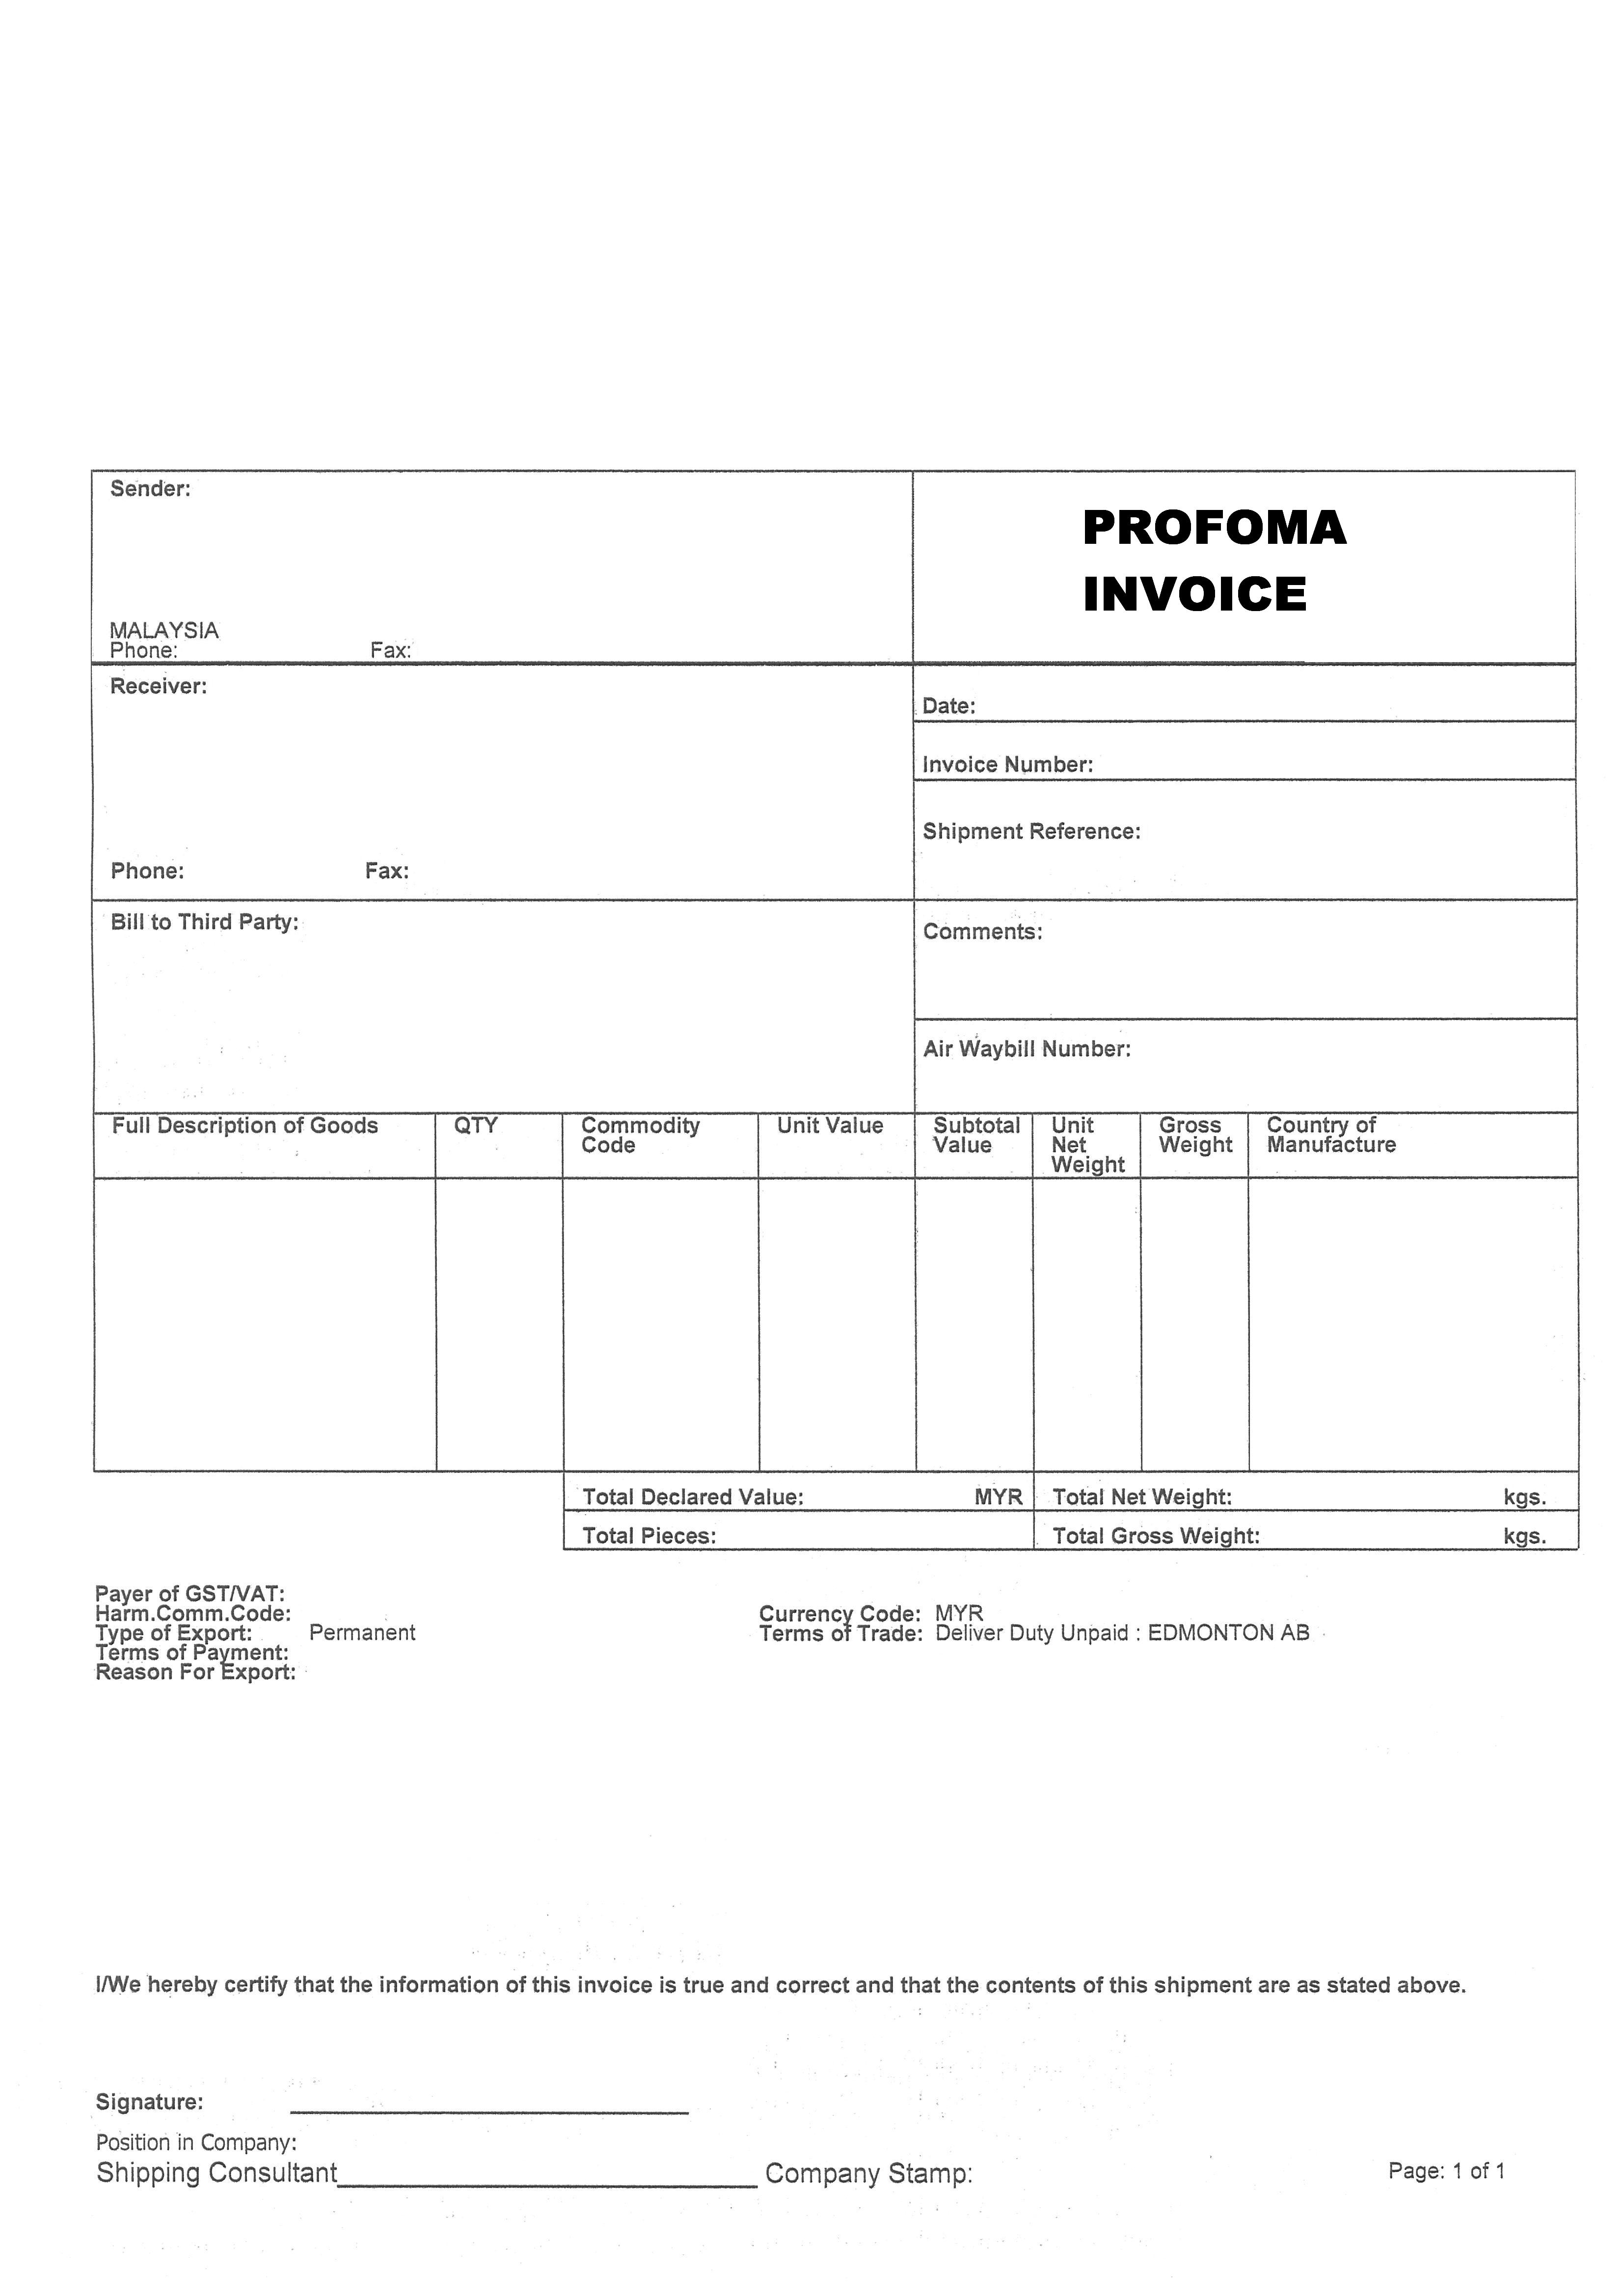 What is a proforma invoice?